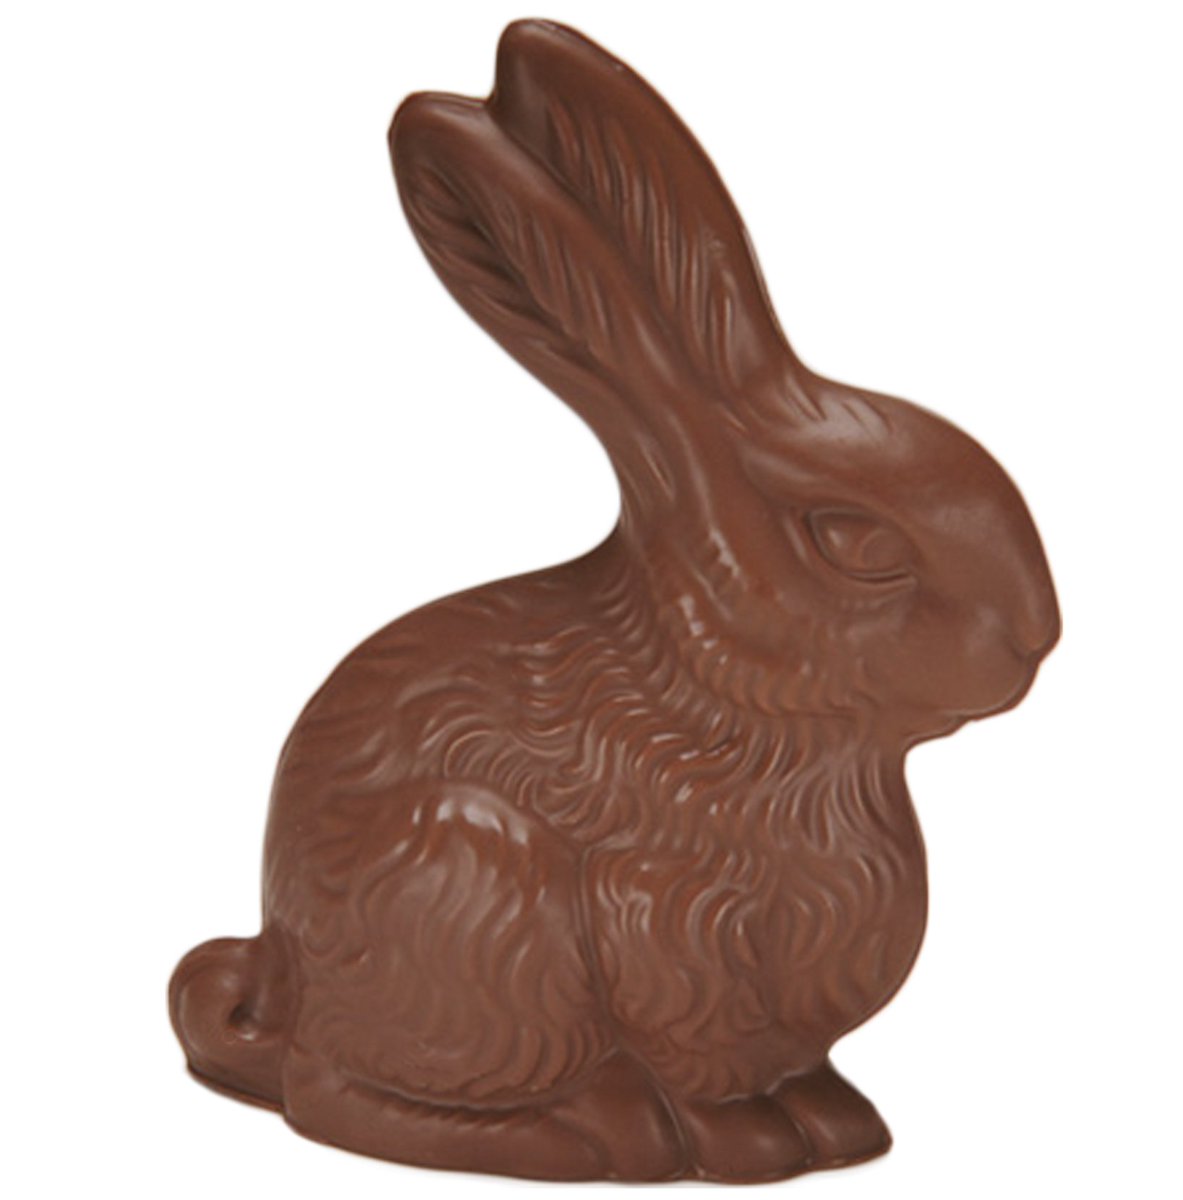 Does anybody break the head off of chocolate bunnies, fill them with liquor, drink their drink, and then eat their chocolate? If not, why not?